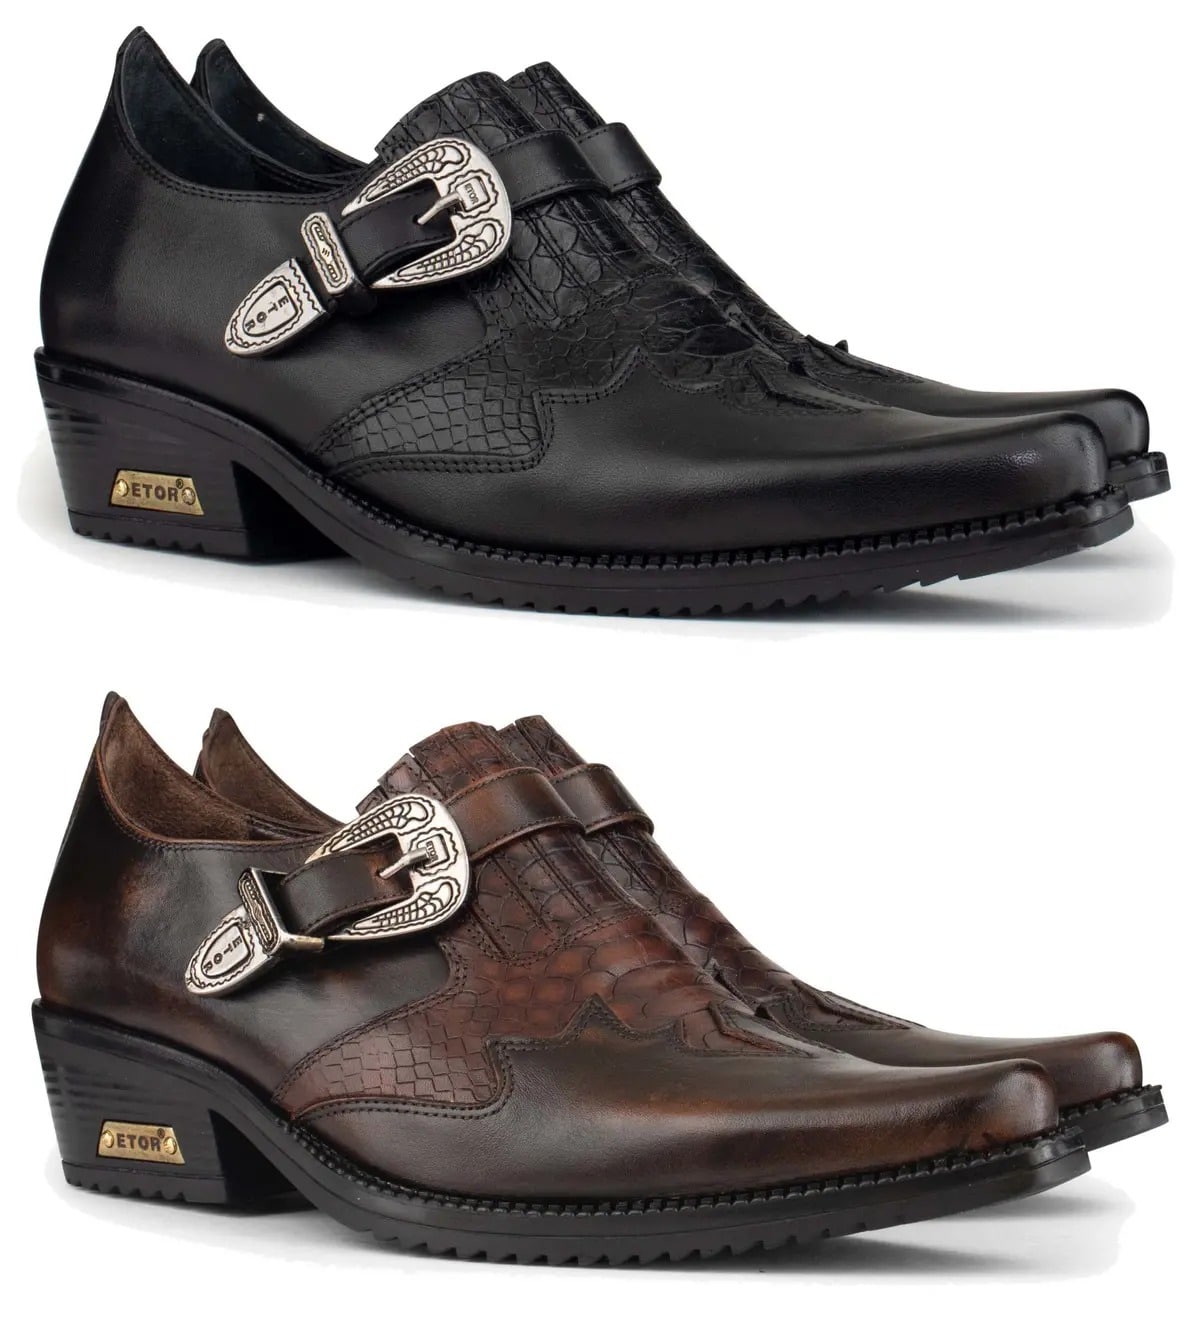 Mens Real Leather Riding Shoes with Buckle: Buy Online - Happy Gentleman